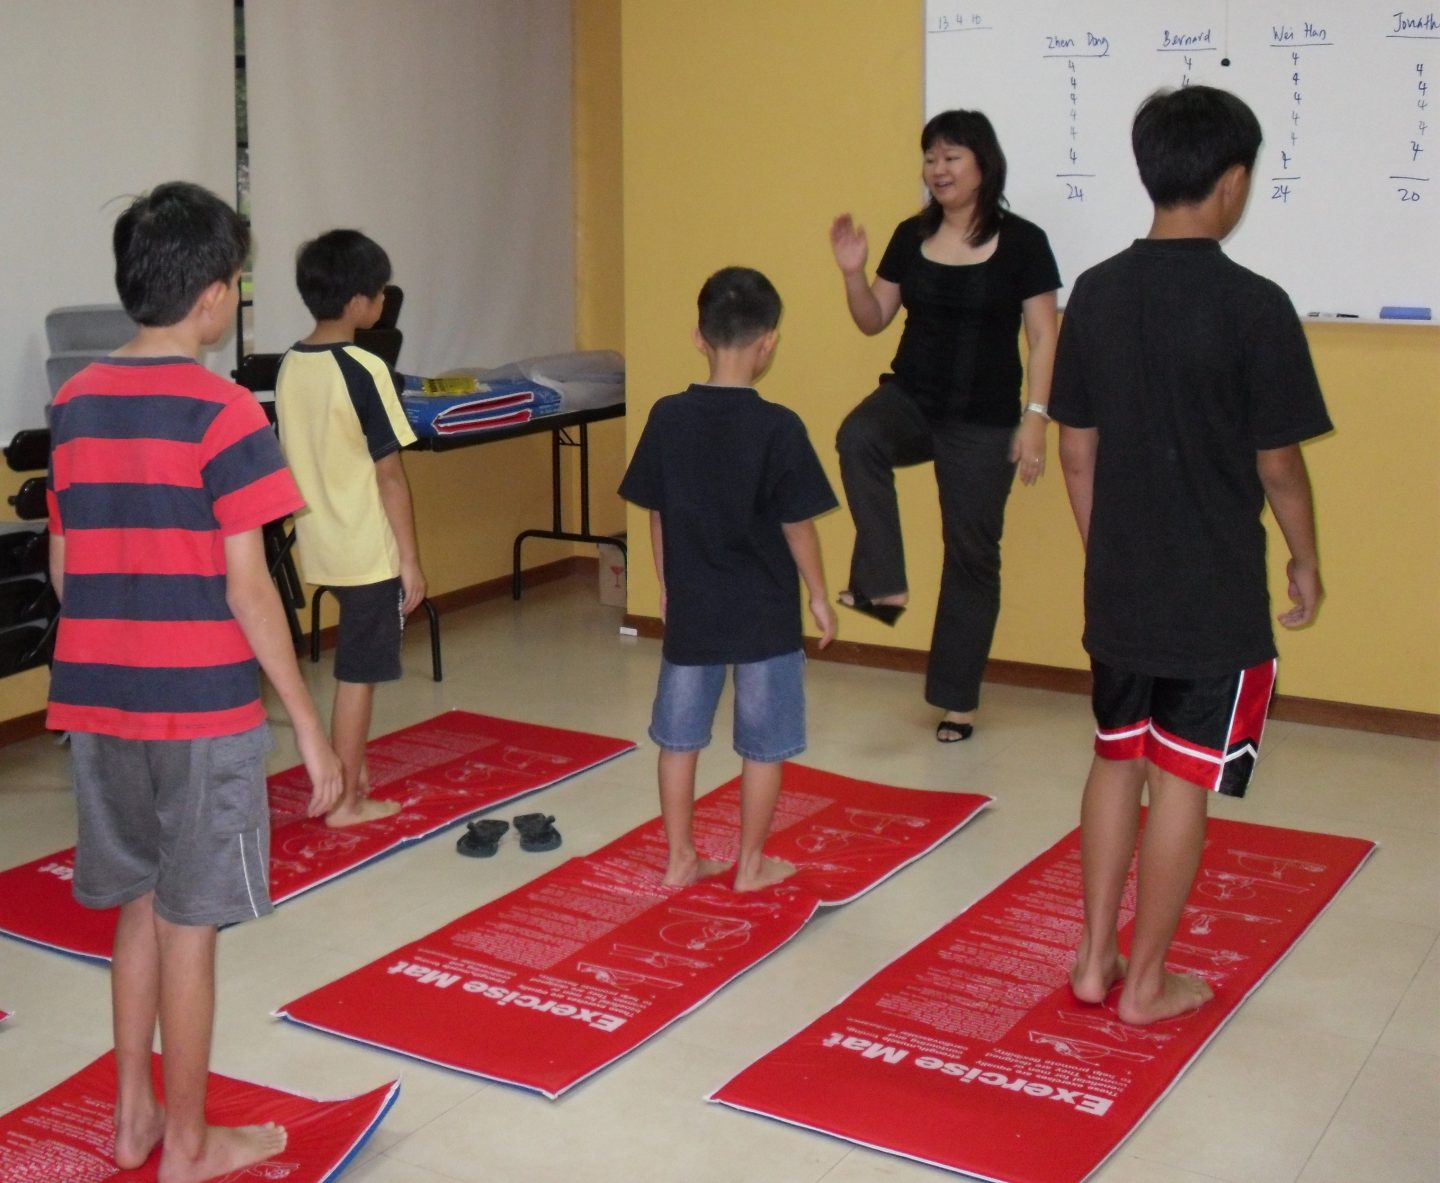 Movement is part of the KidsBright Programme because it promotes better body coordination and cognition. Photo courtesy of The Straits Times.